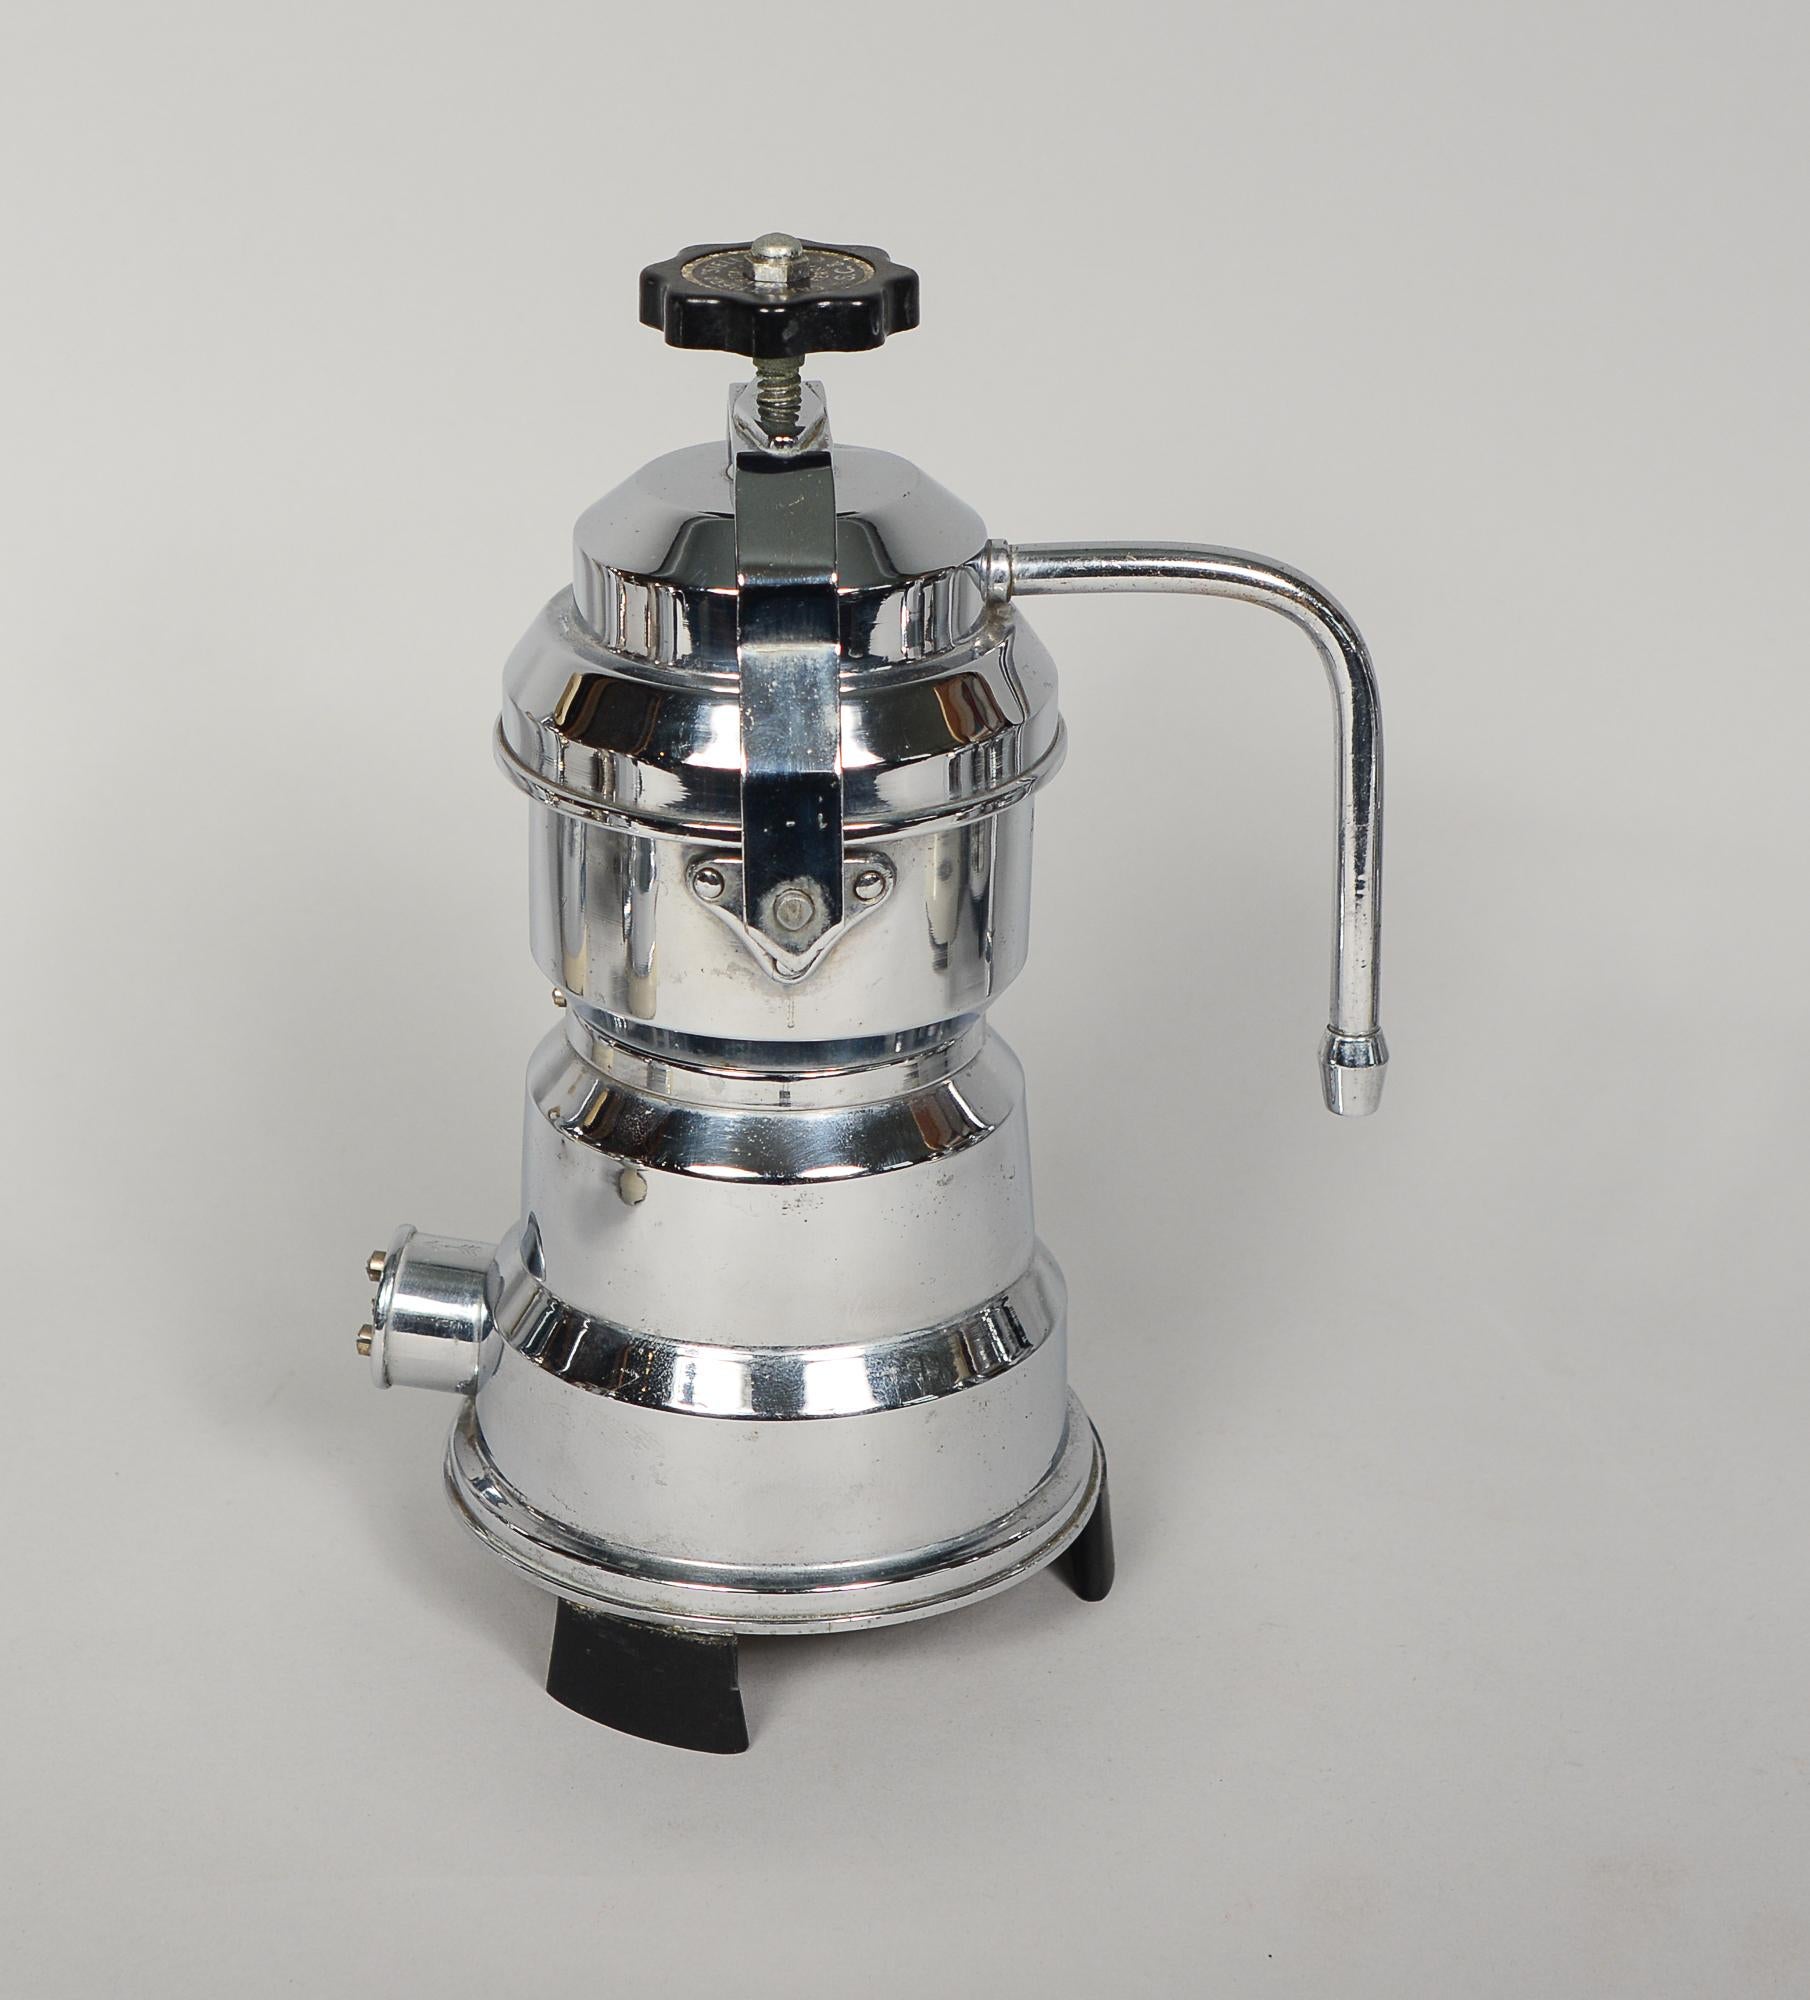 Aluminum Collection of Vintage Art Deco Espresso Makers in Chrome and Nickel Plate For Sale